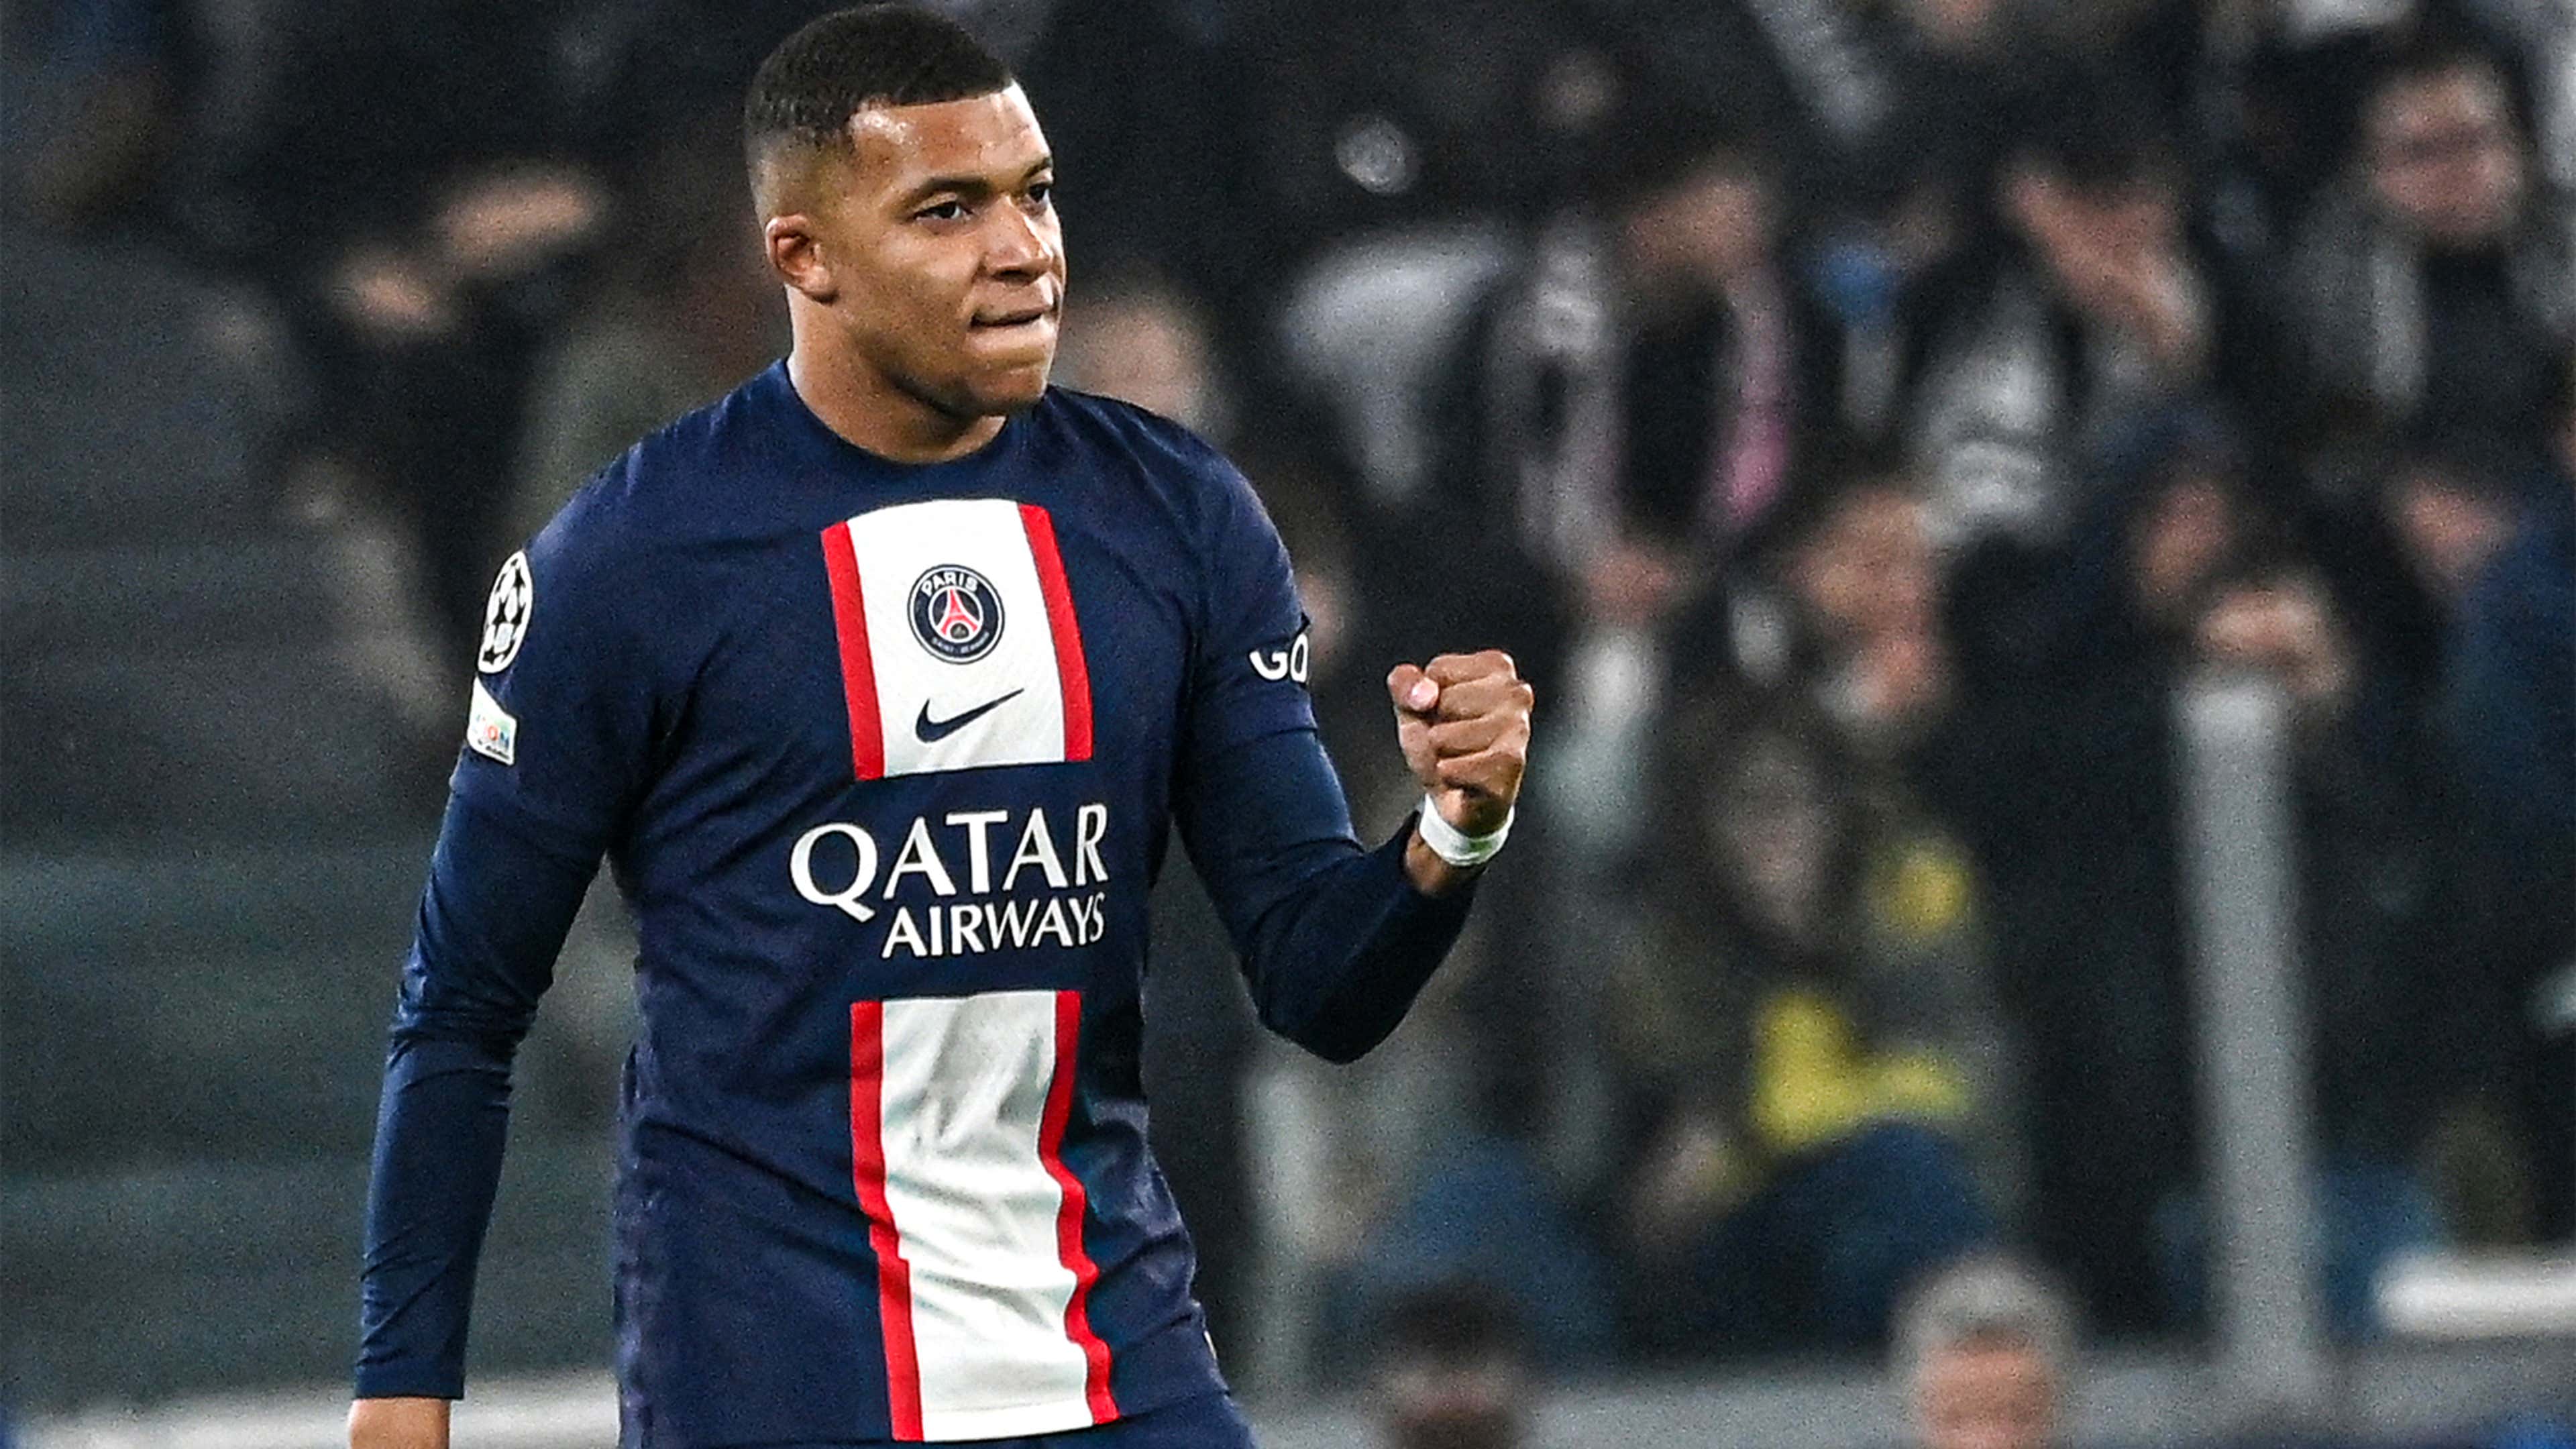 Mbappe makes swift return to PSG training after World Cup final heartbreak  with France